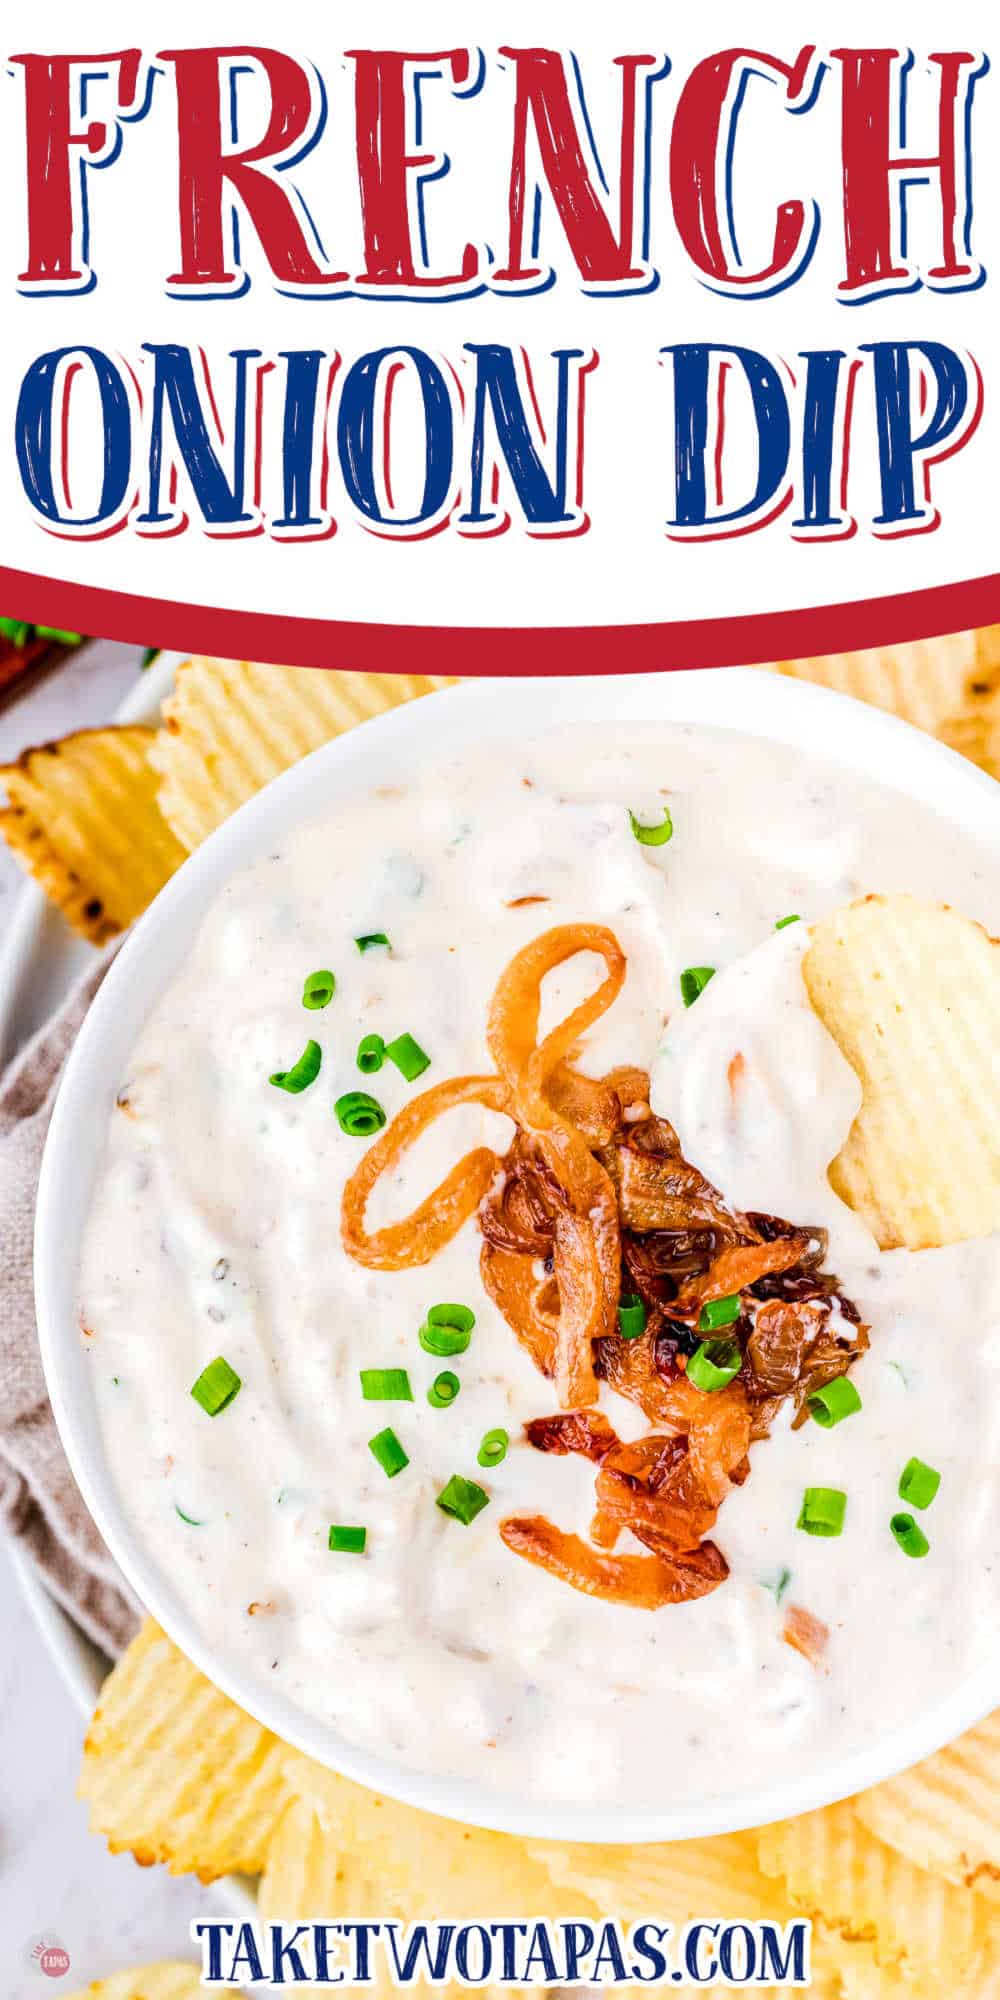 bowl of dip with text "French Onion Dip"